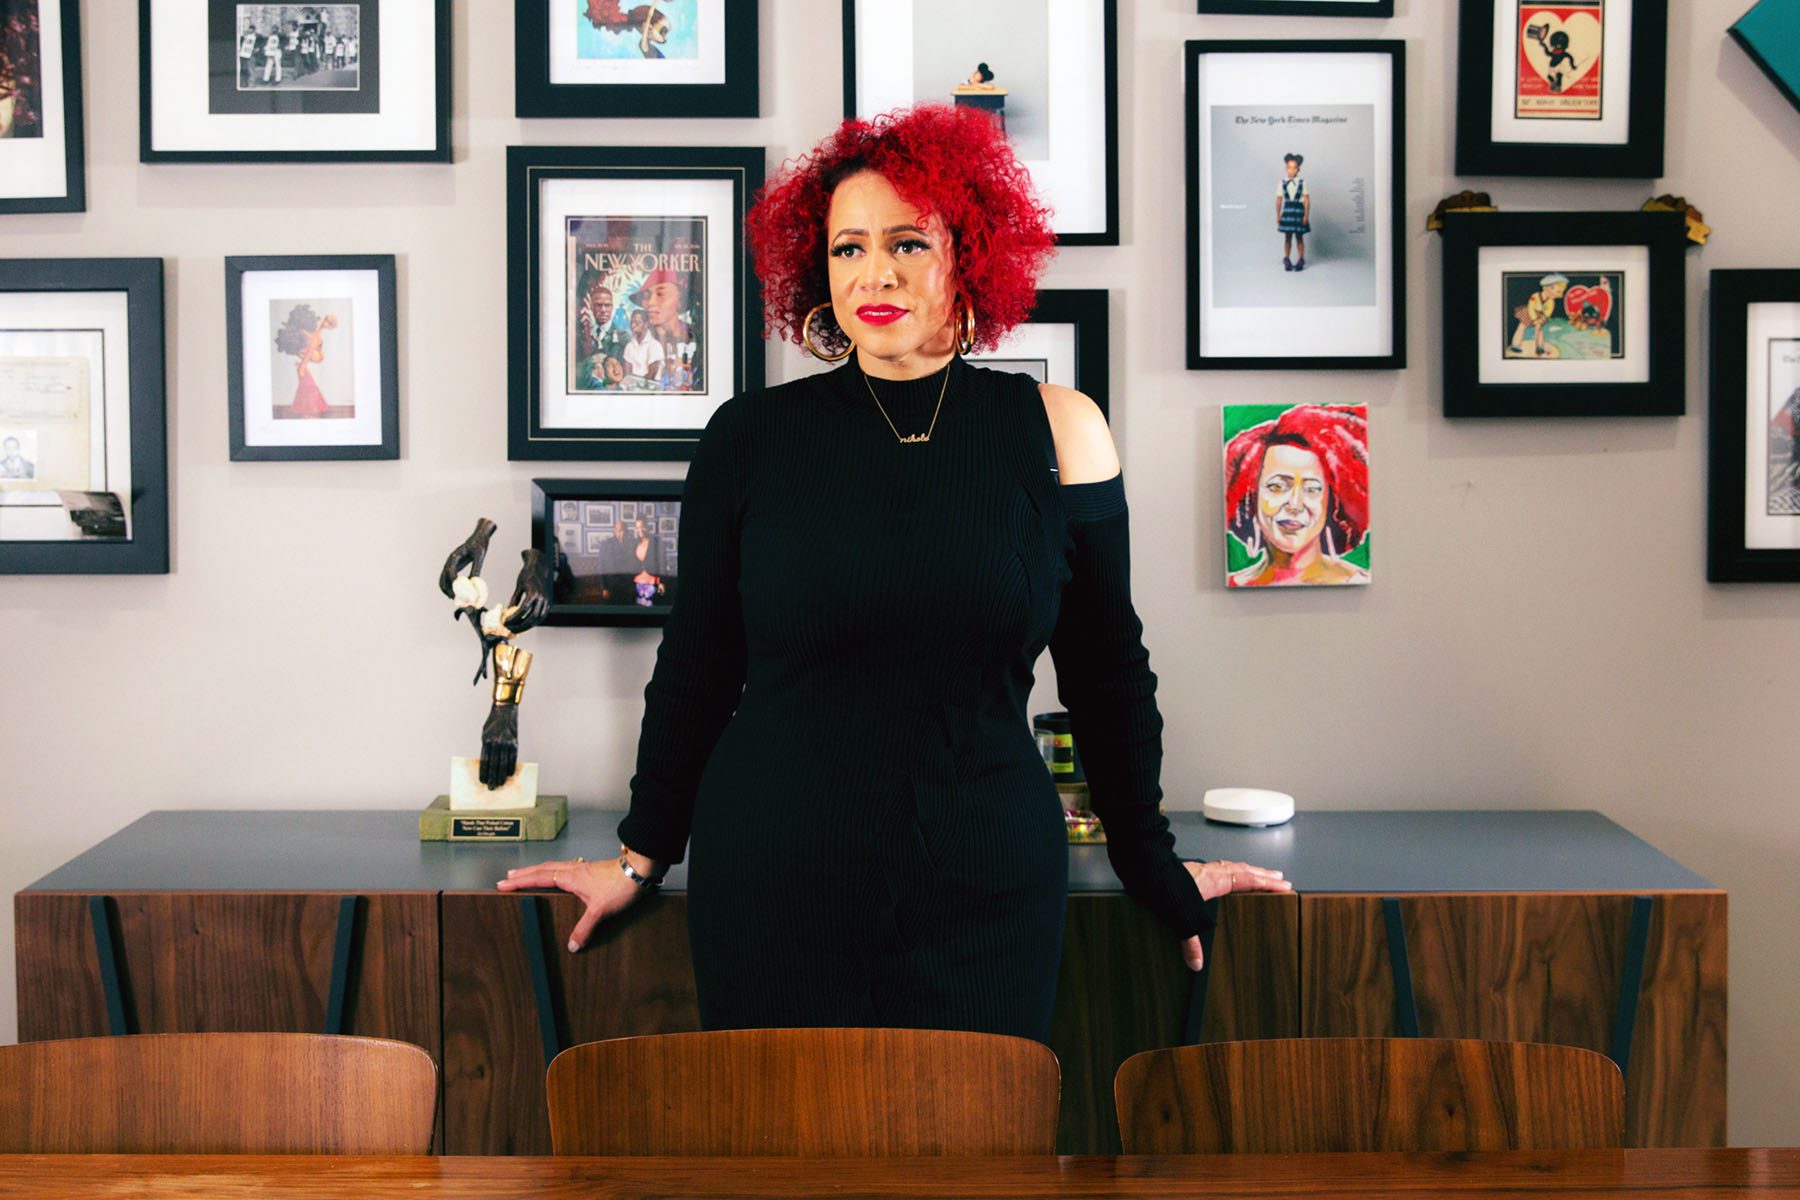 Nikole Hannah-Jones poses for a portrait at home in front of a gallery wall.